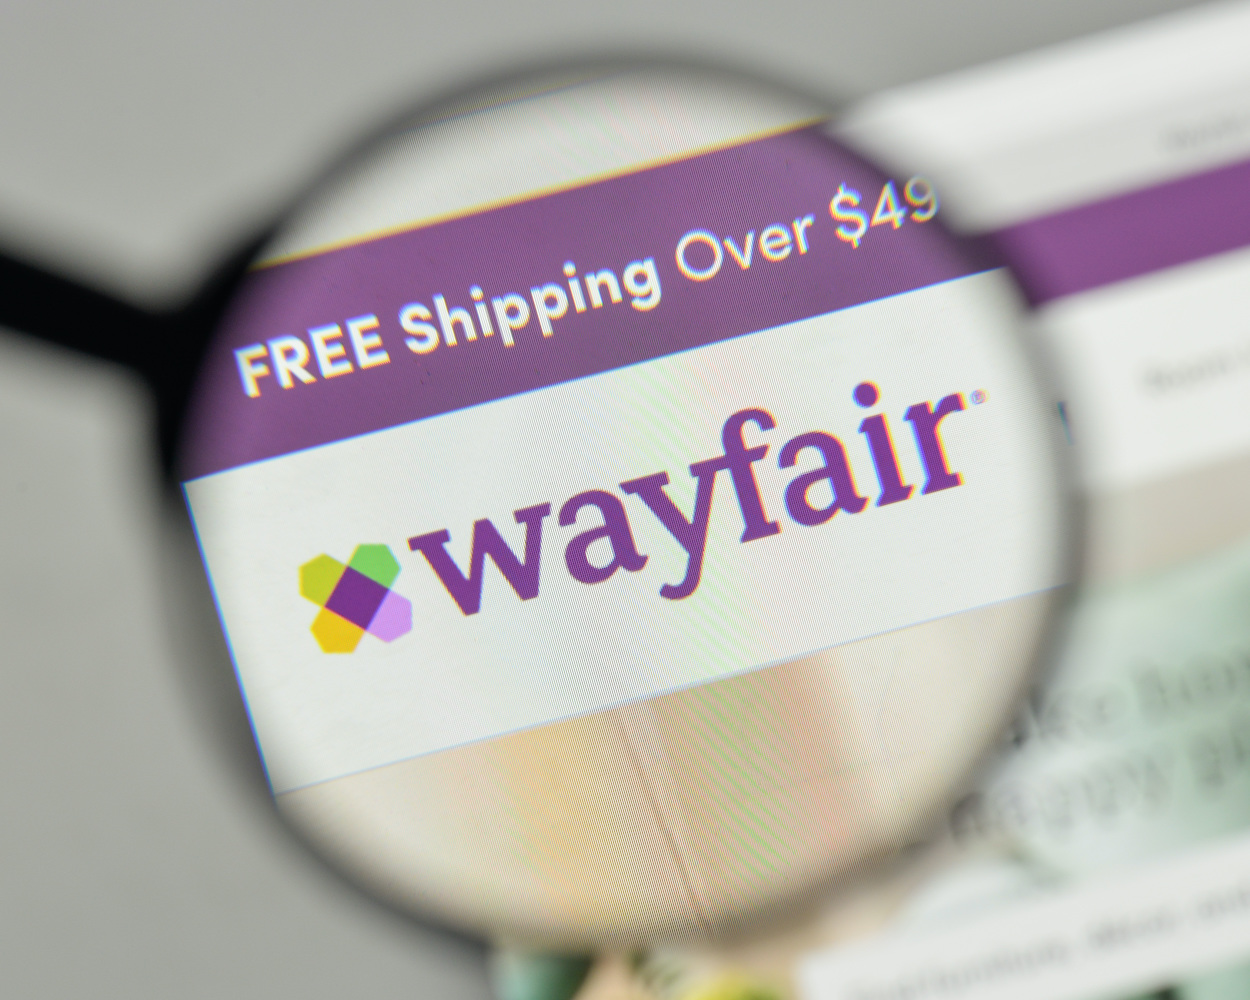 Boston-based Wayfair sees first profitable quarter amid surge in demand due to the pandemic